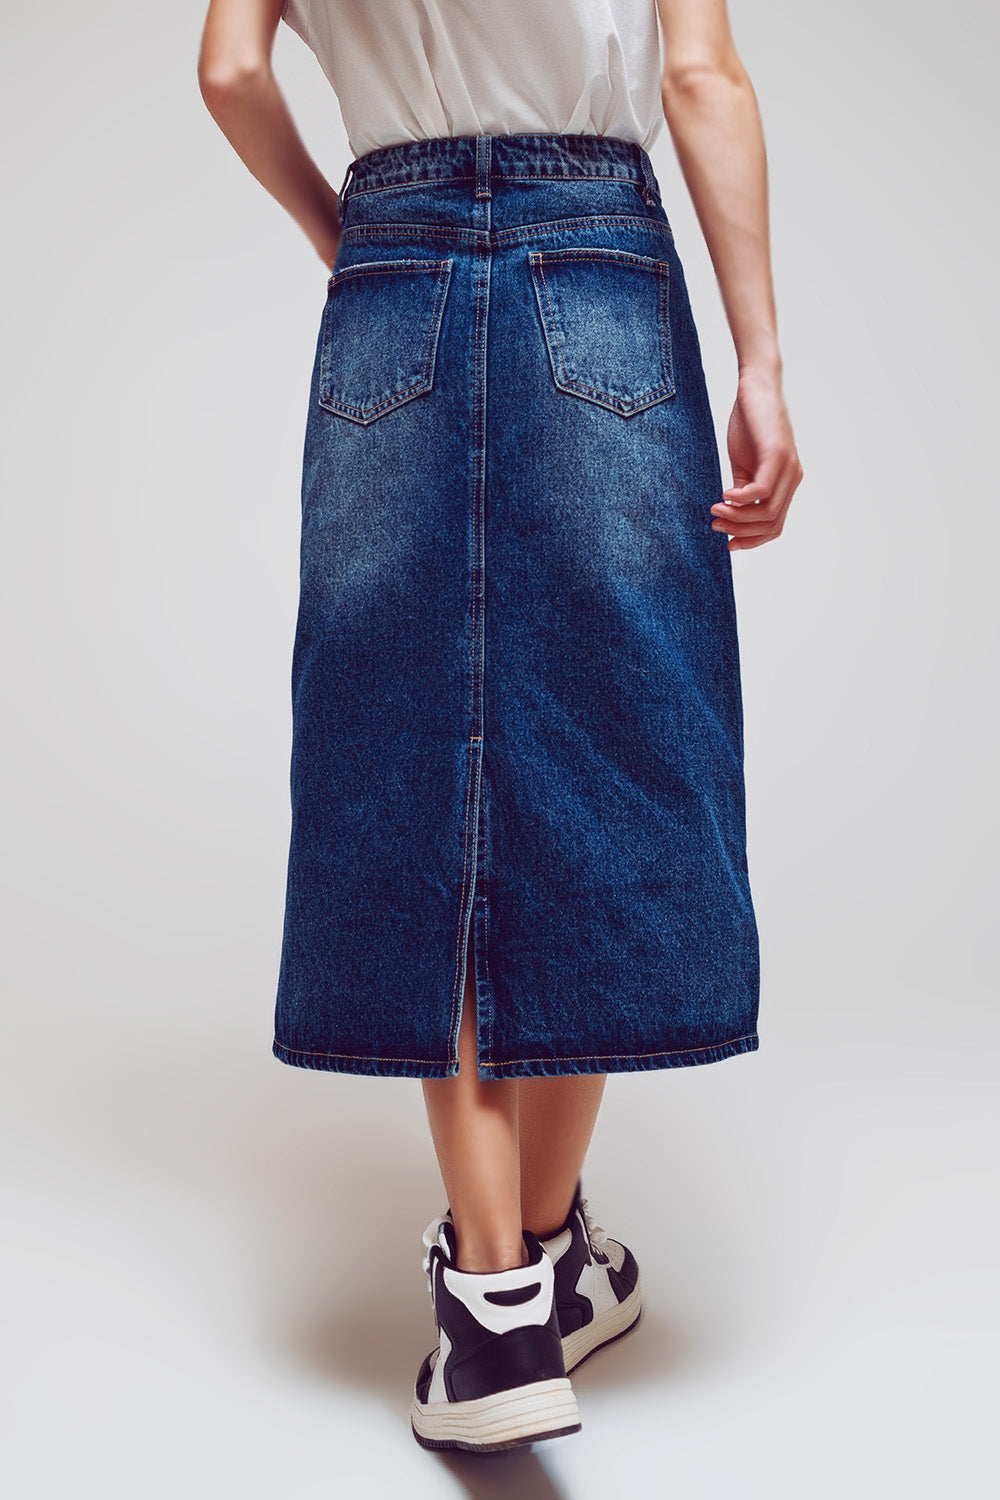 Maxi Pencil Denim Skirt With Panel Details In The Front - Szua Store